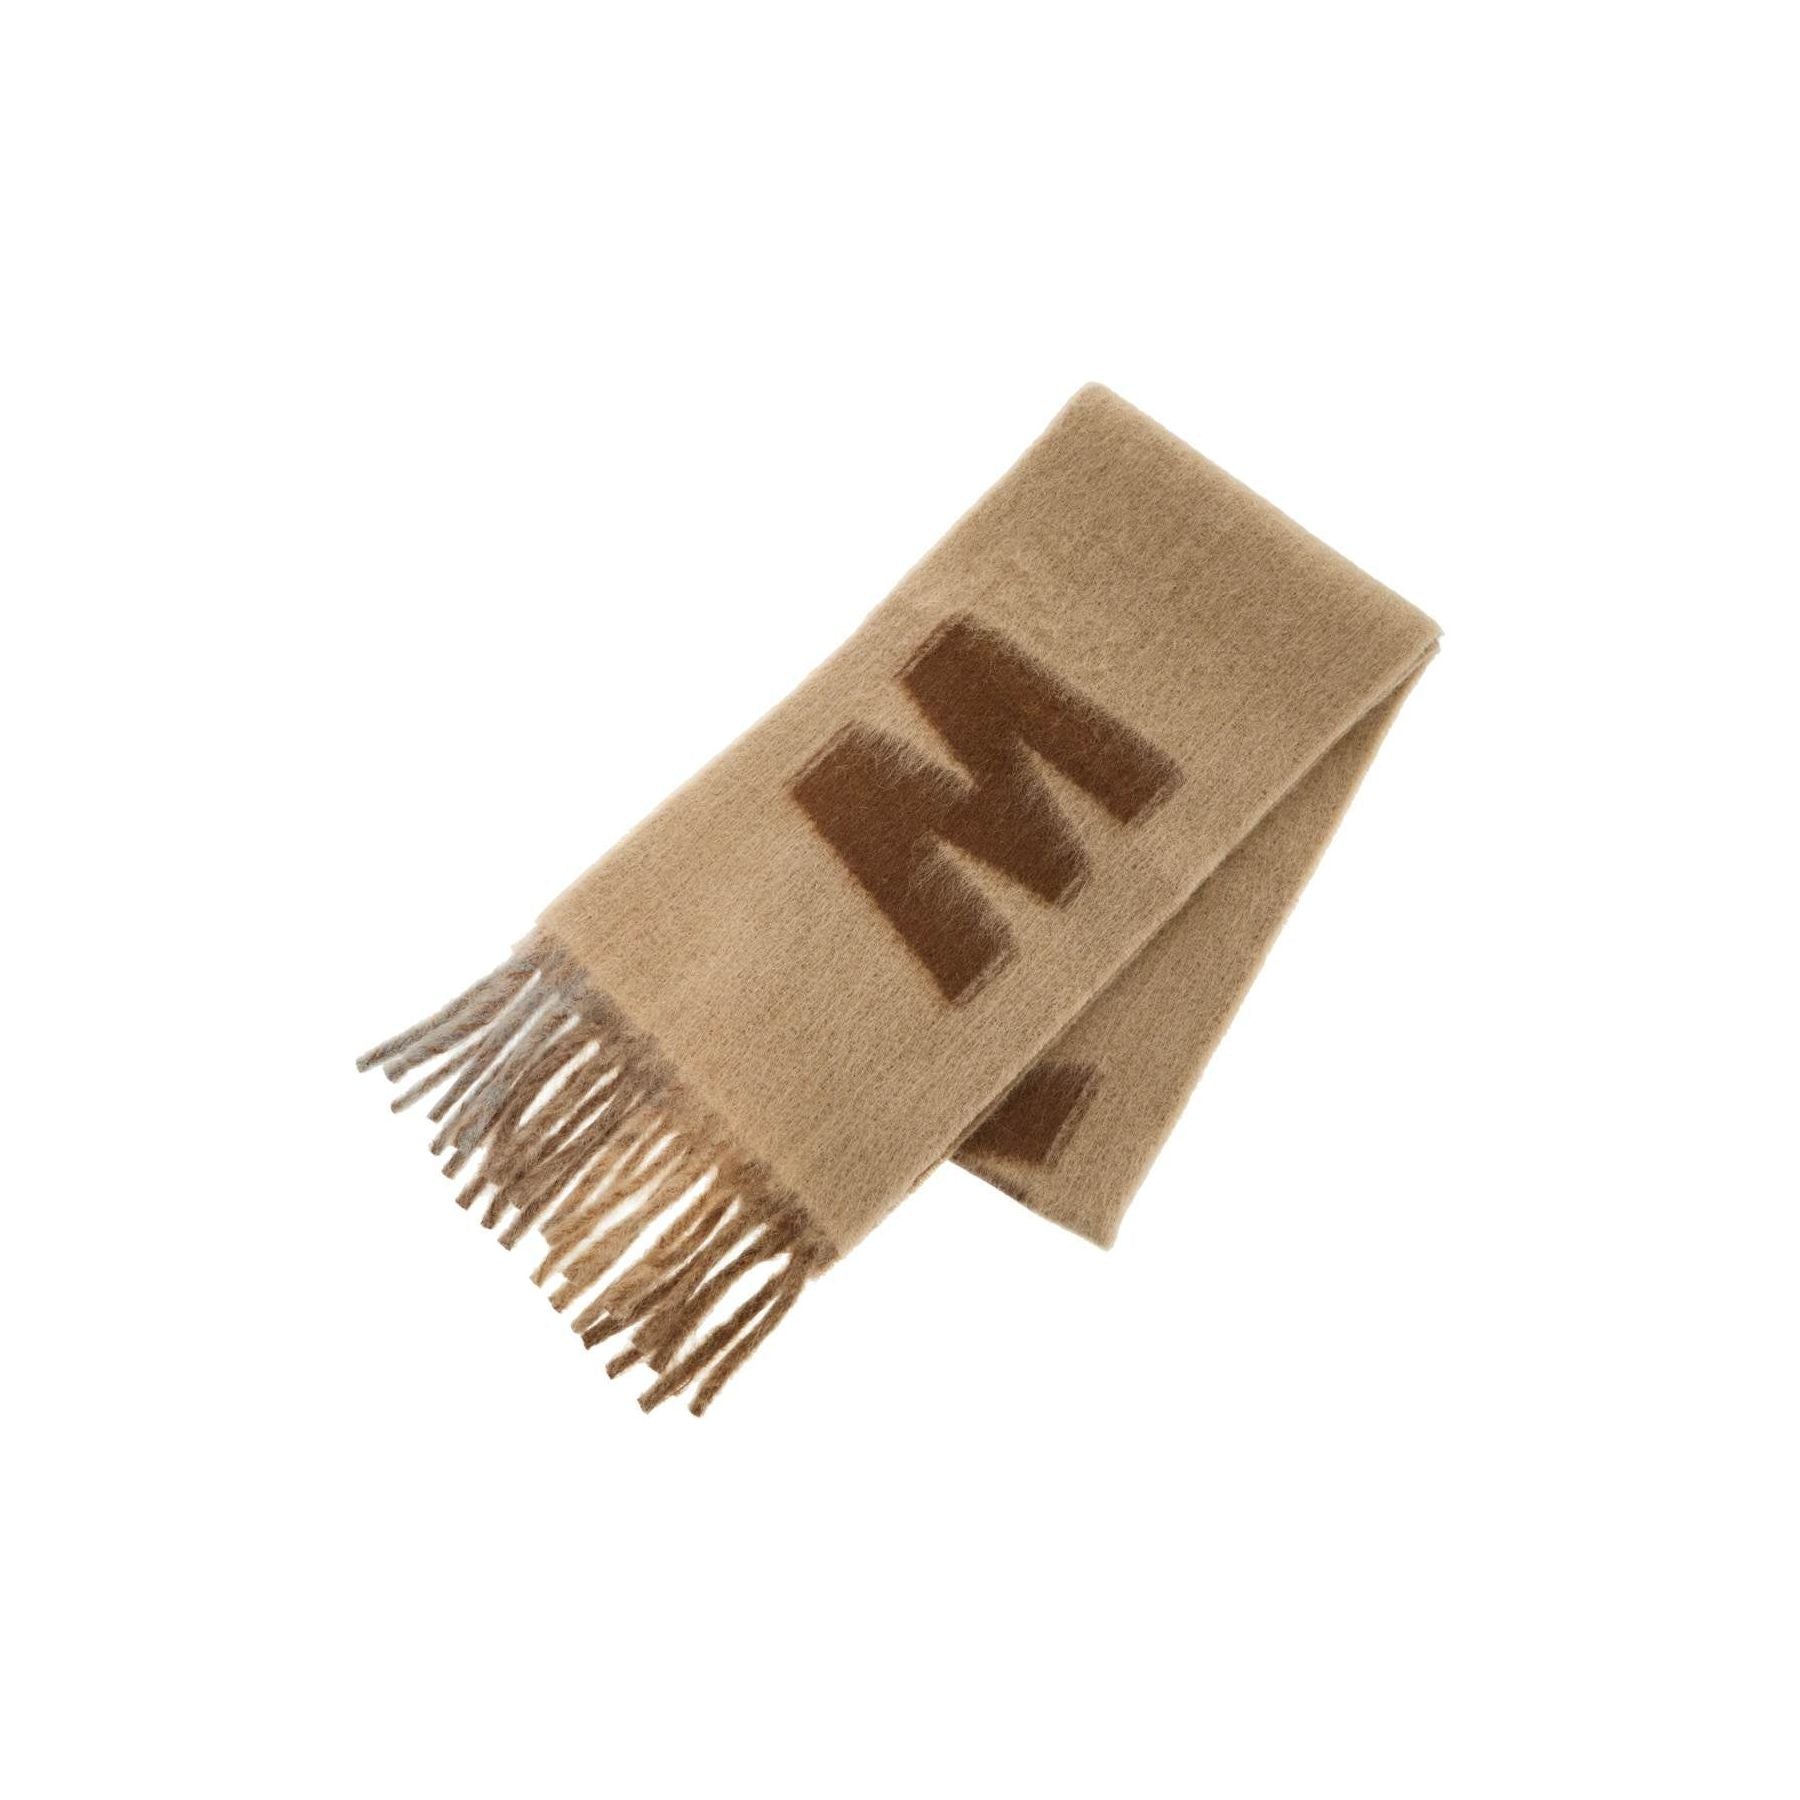 Maxi Logo Mohair and Wool Scarf